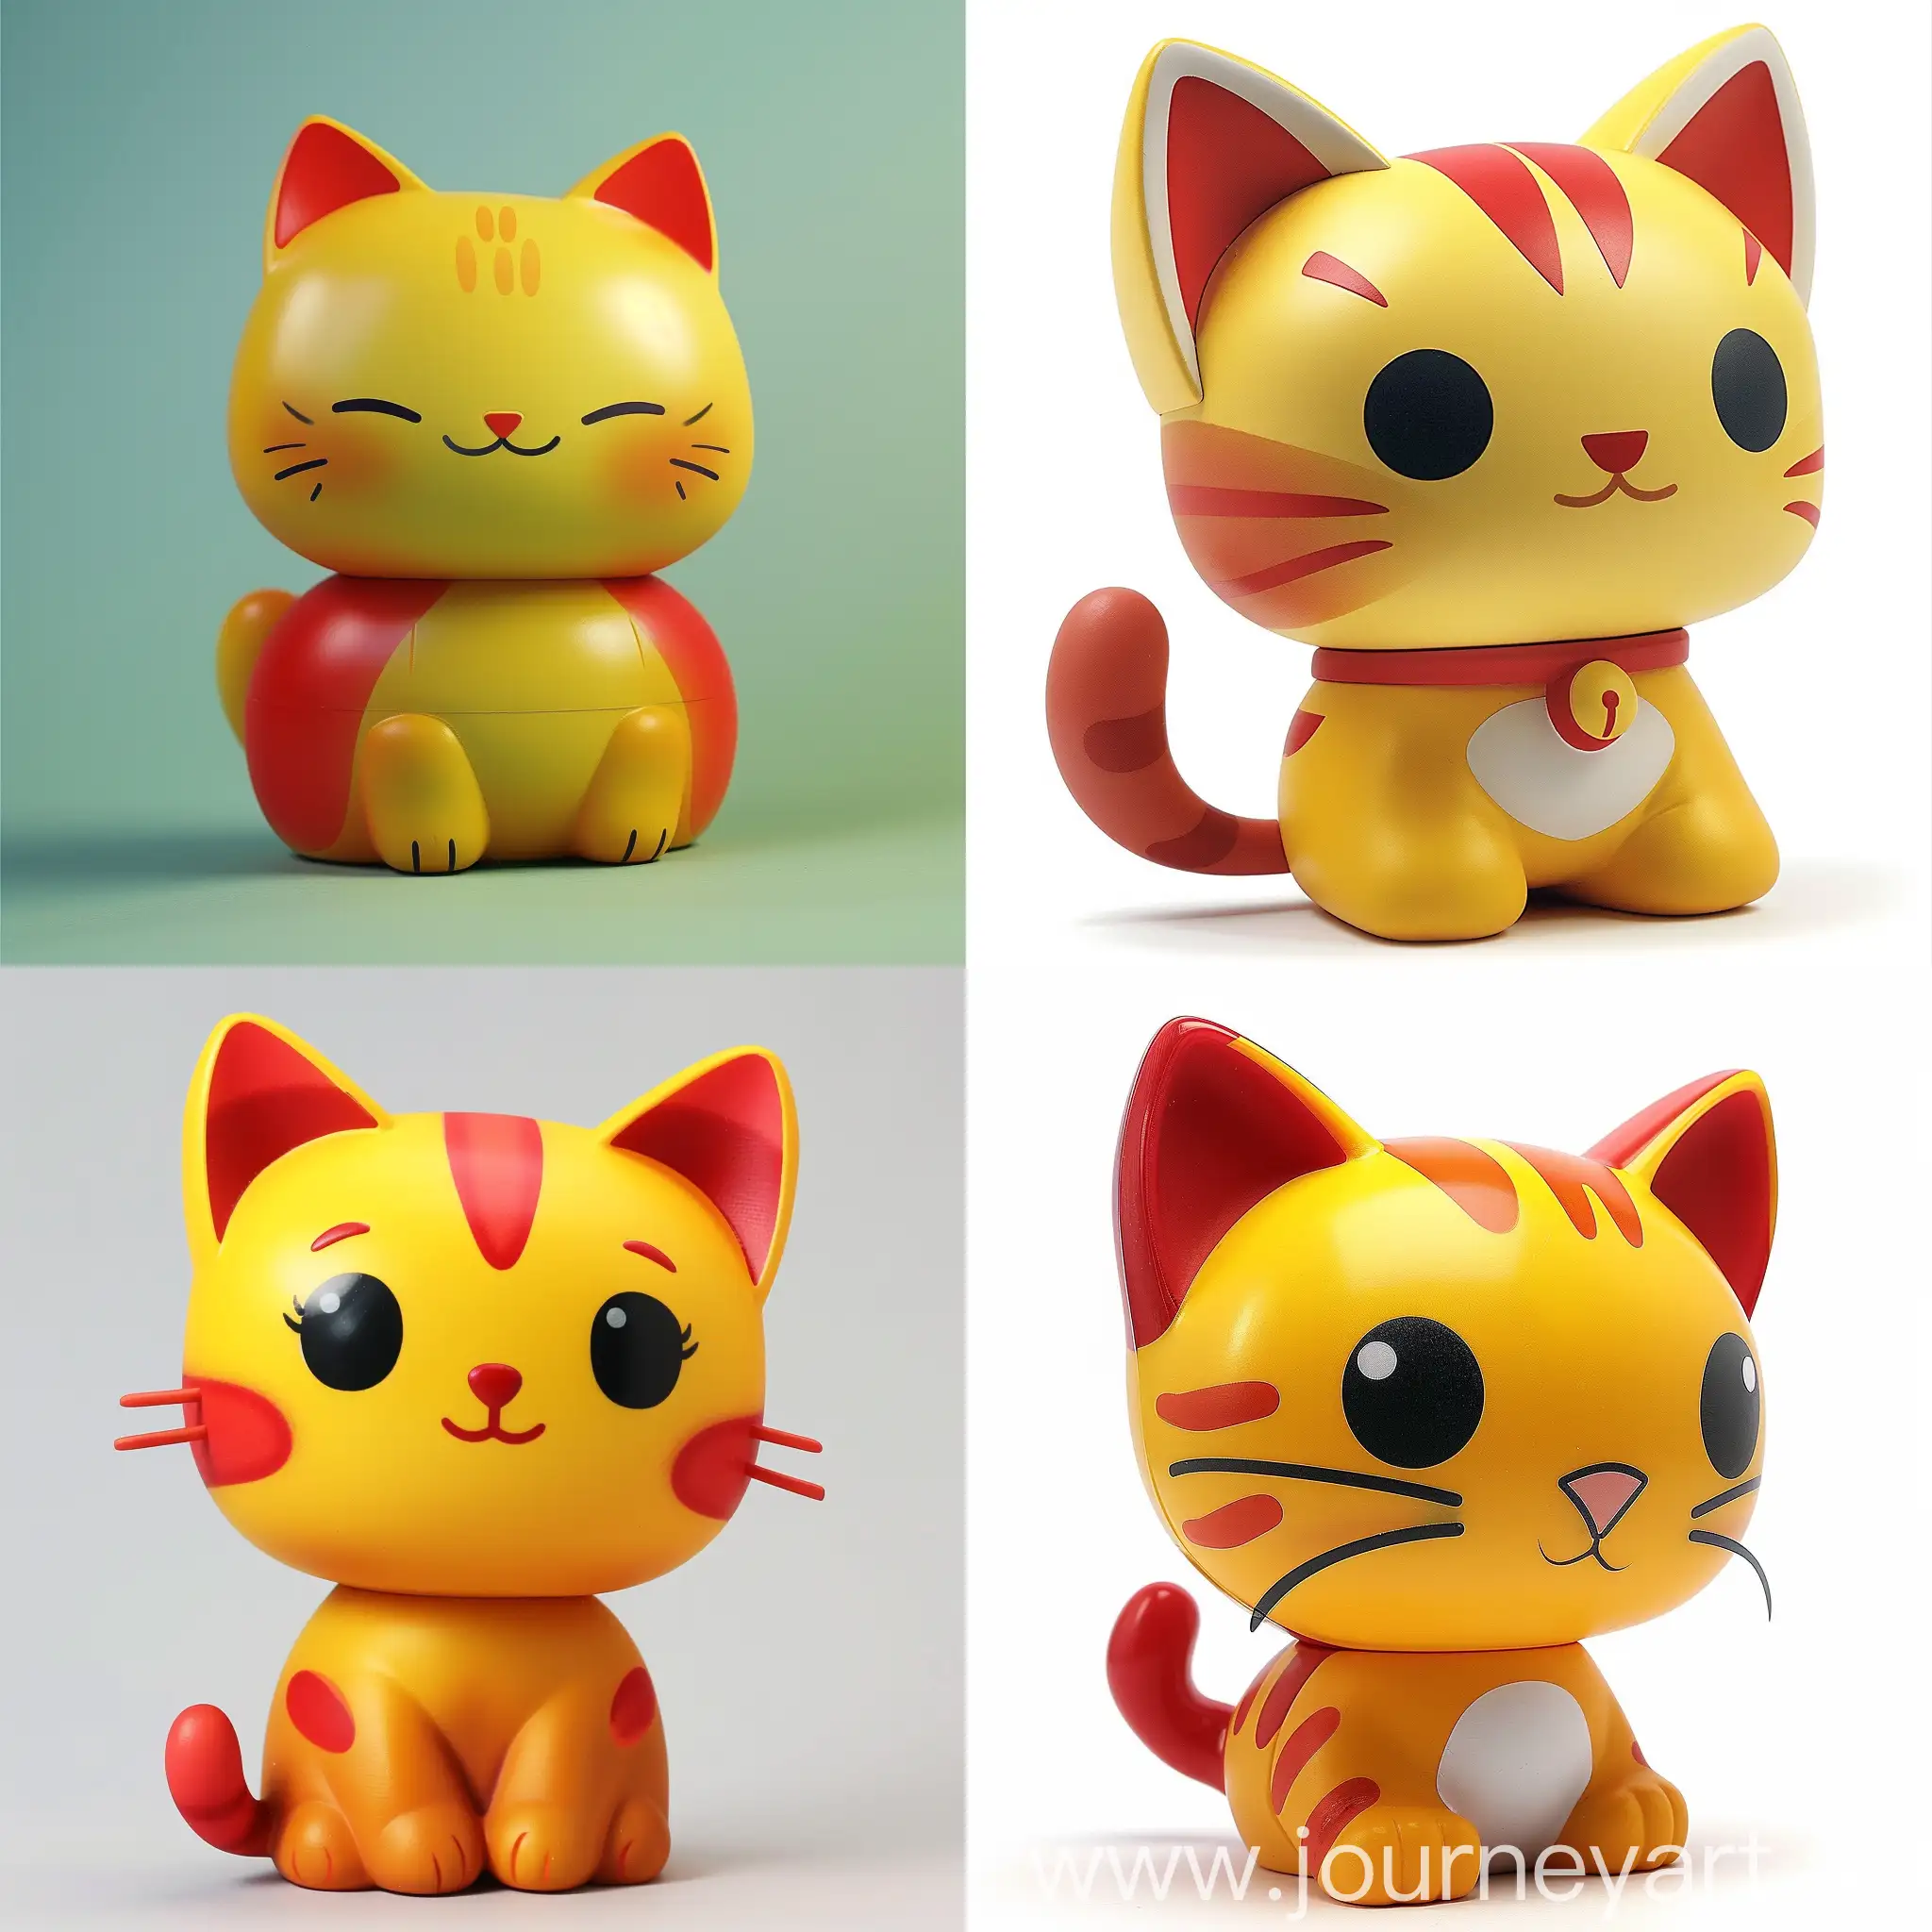 Cute-Yellow-and-Red-Cat-Designer-Vinyl-Toy